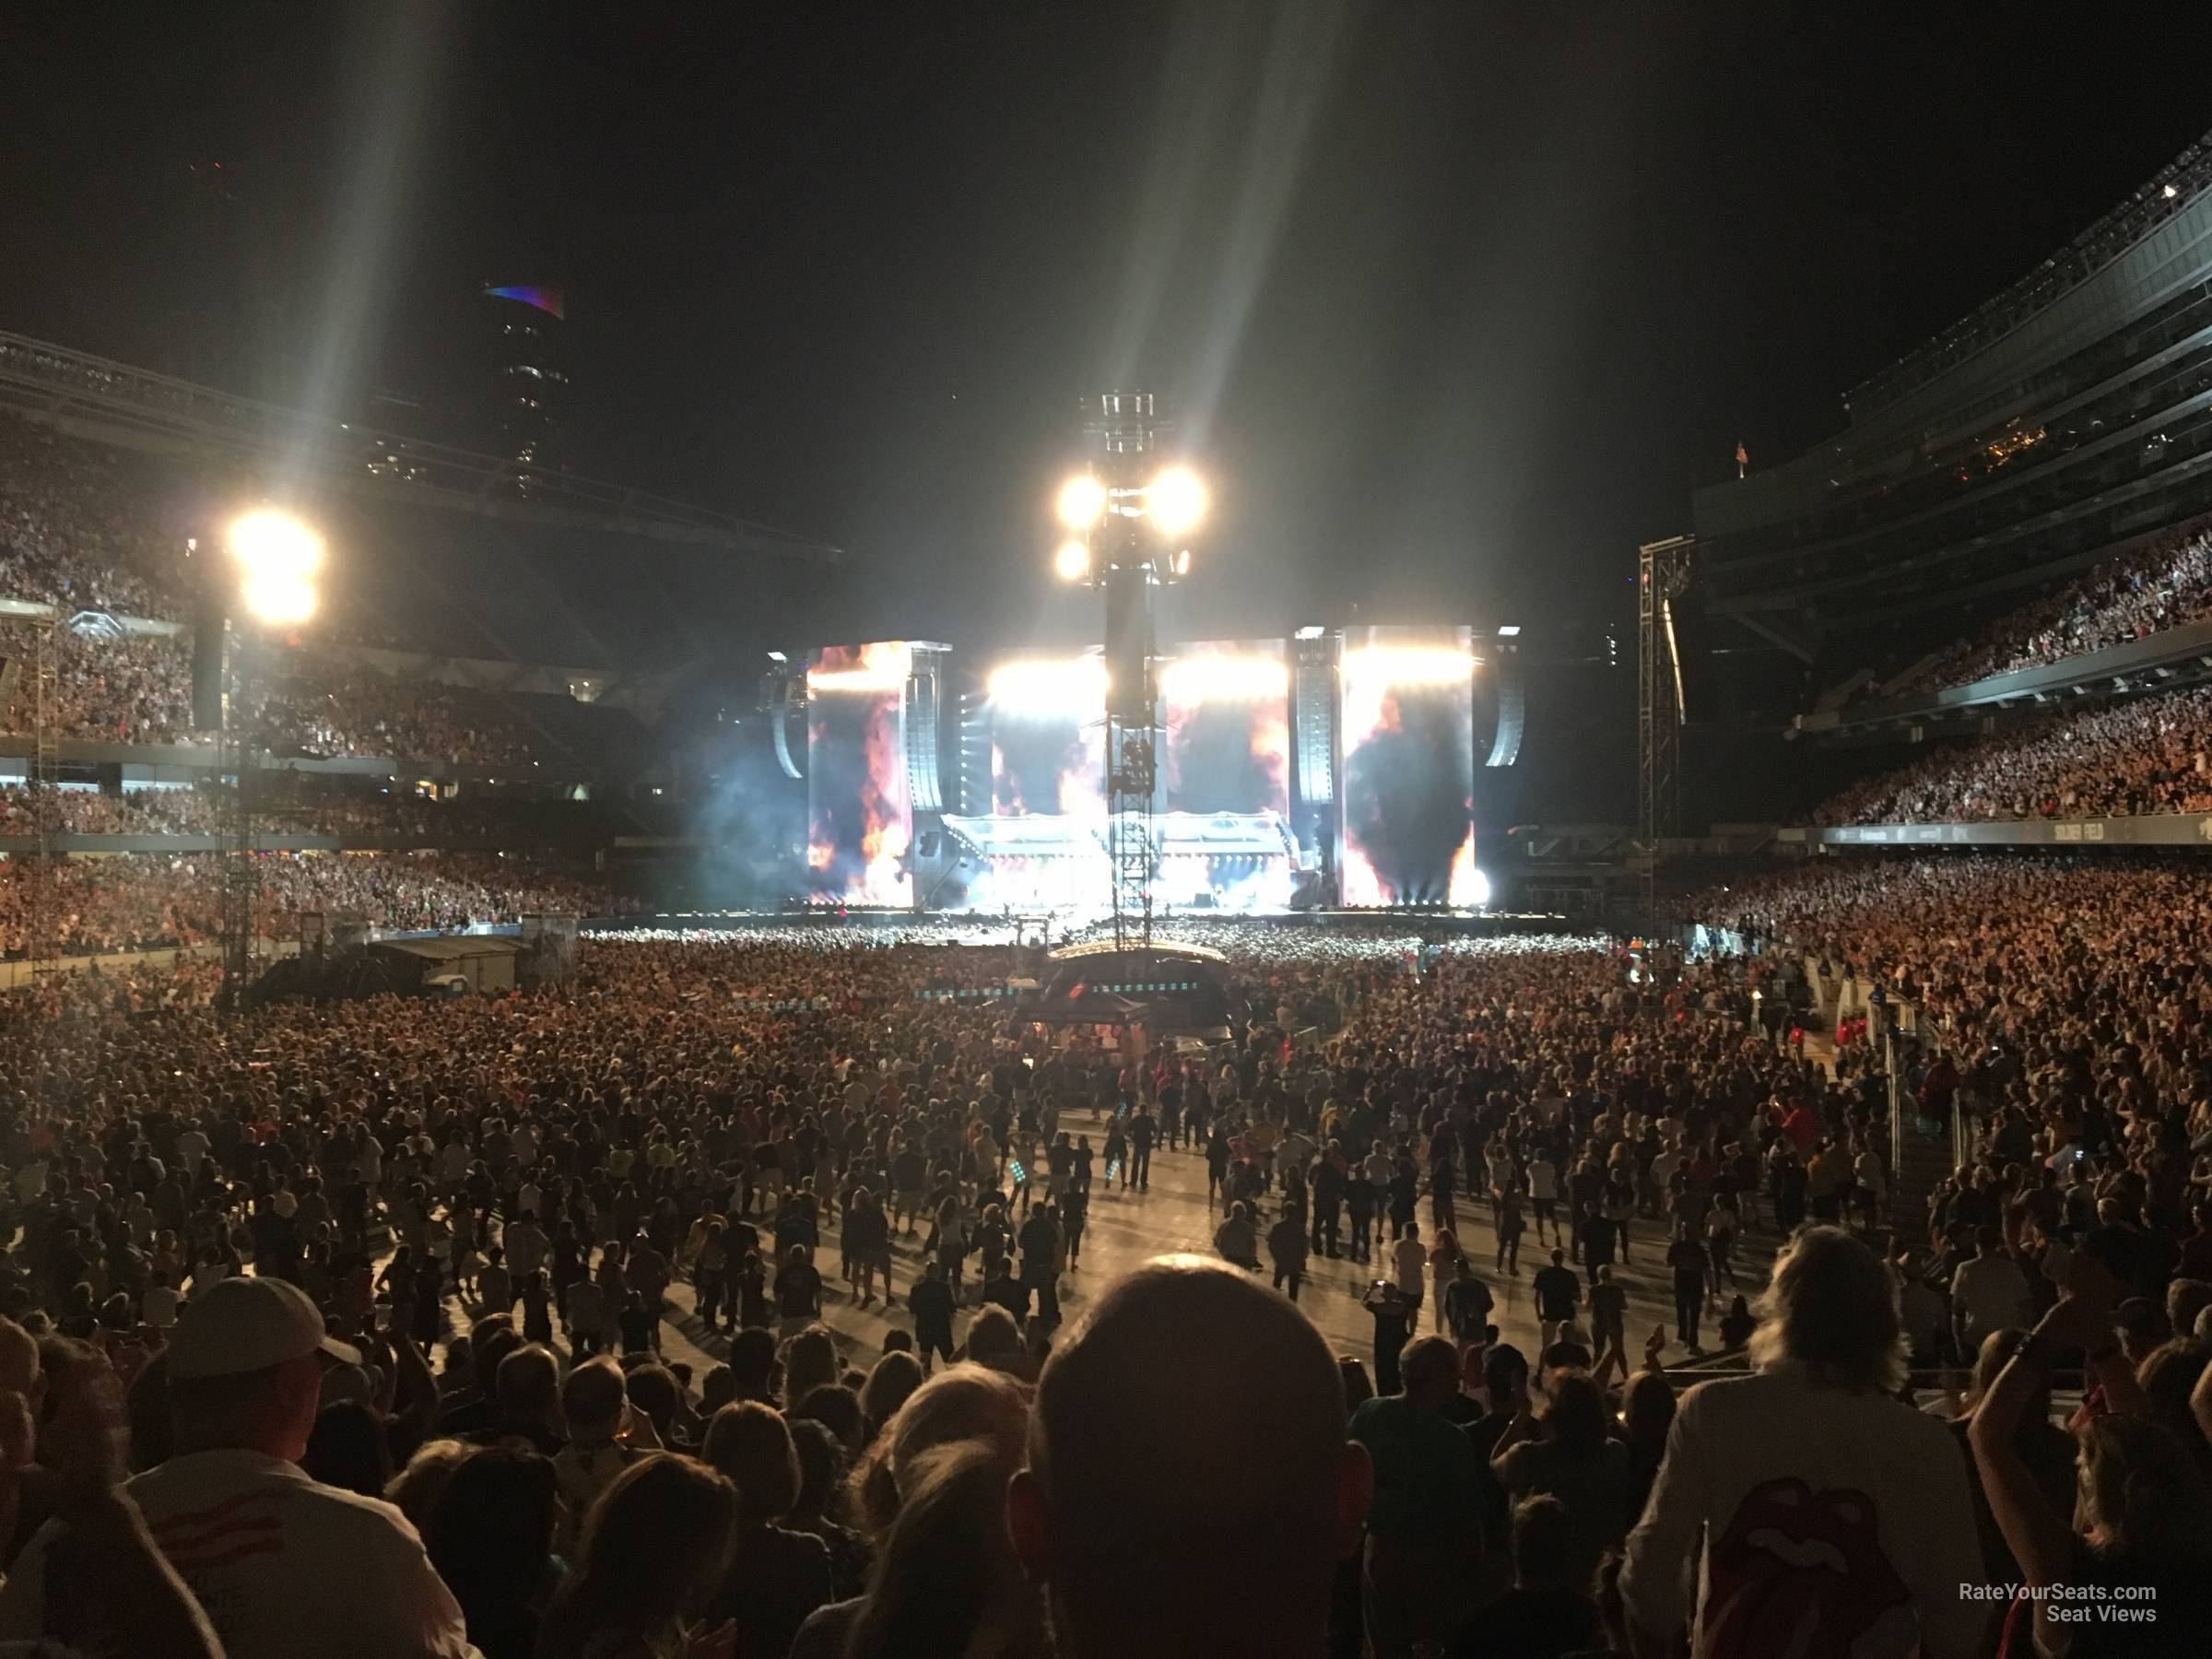 section 119, row 19 seat view  for concert - soldier field